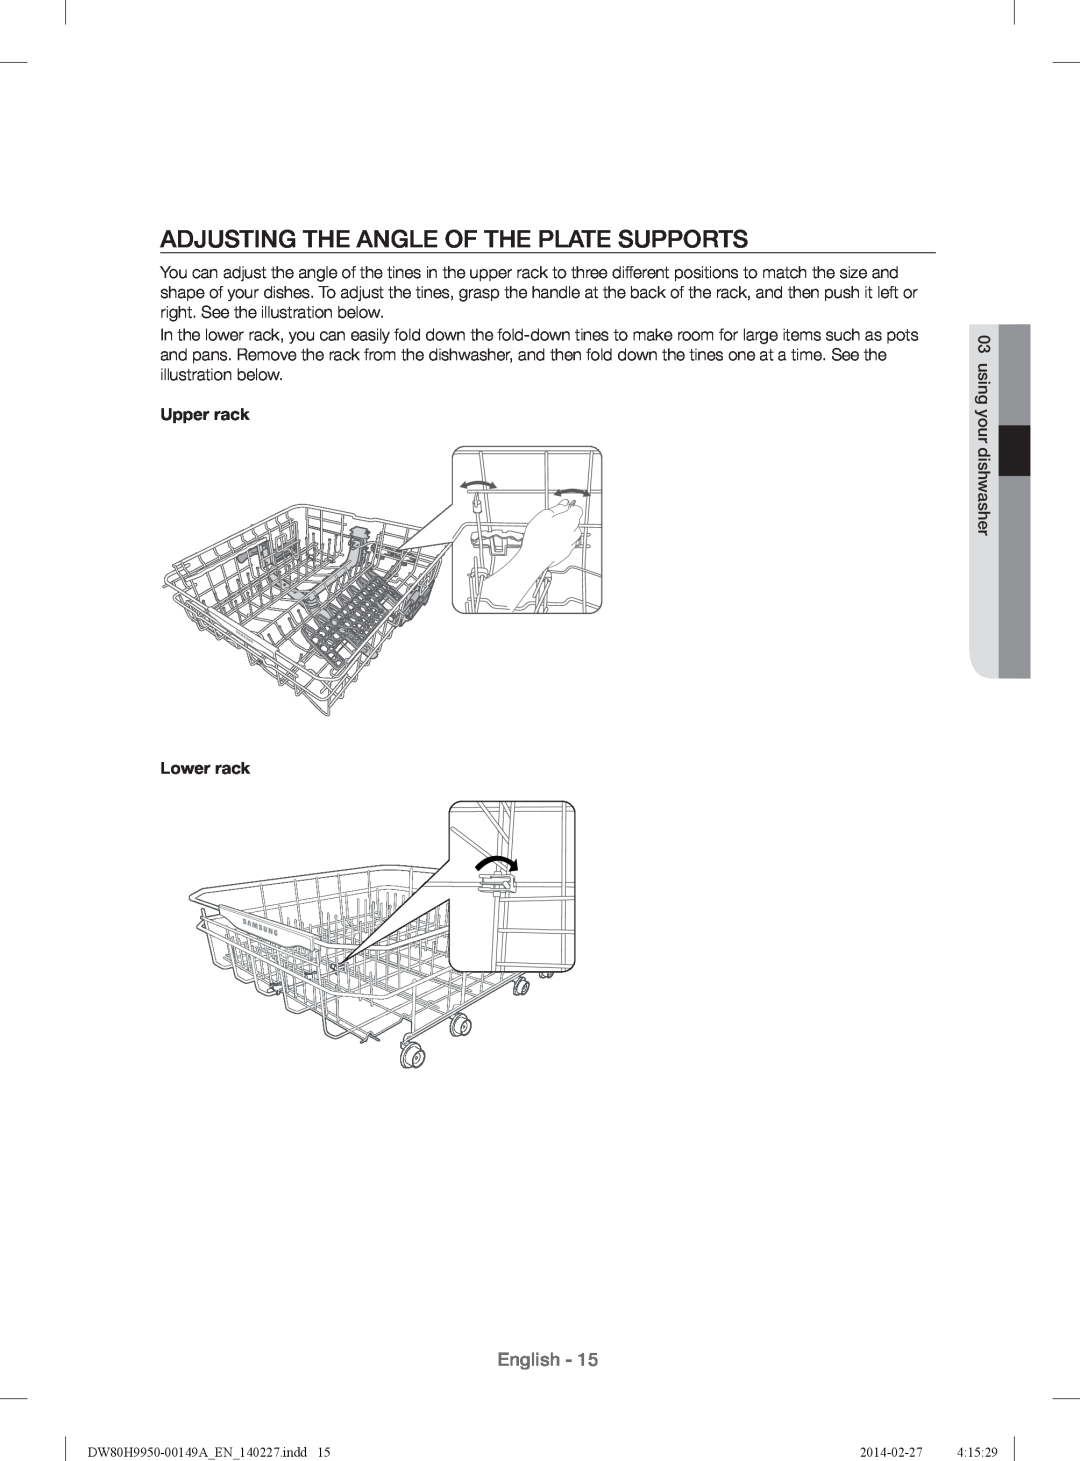 Samsung DW80H9930US user manual Adjusting The Angle Of The Plate Supports, Upper rack Lower rack, English 